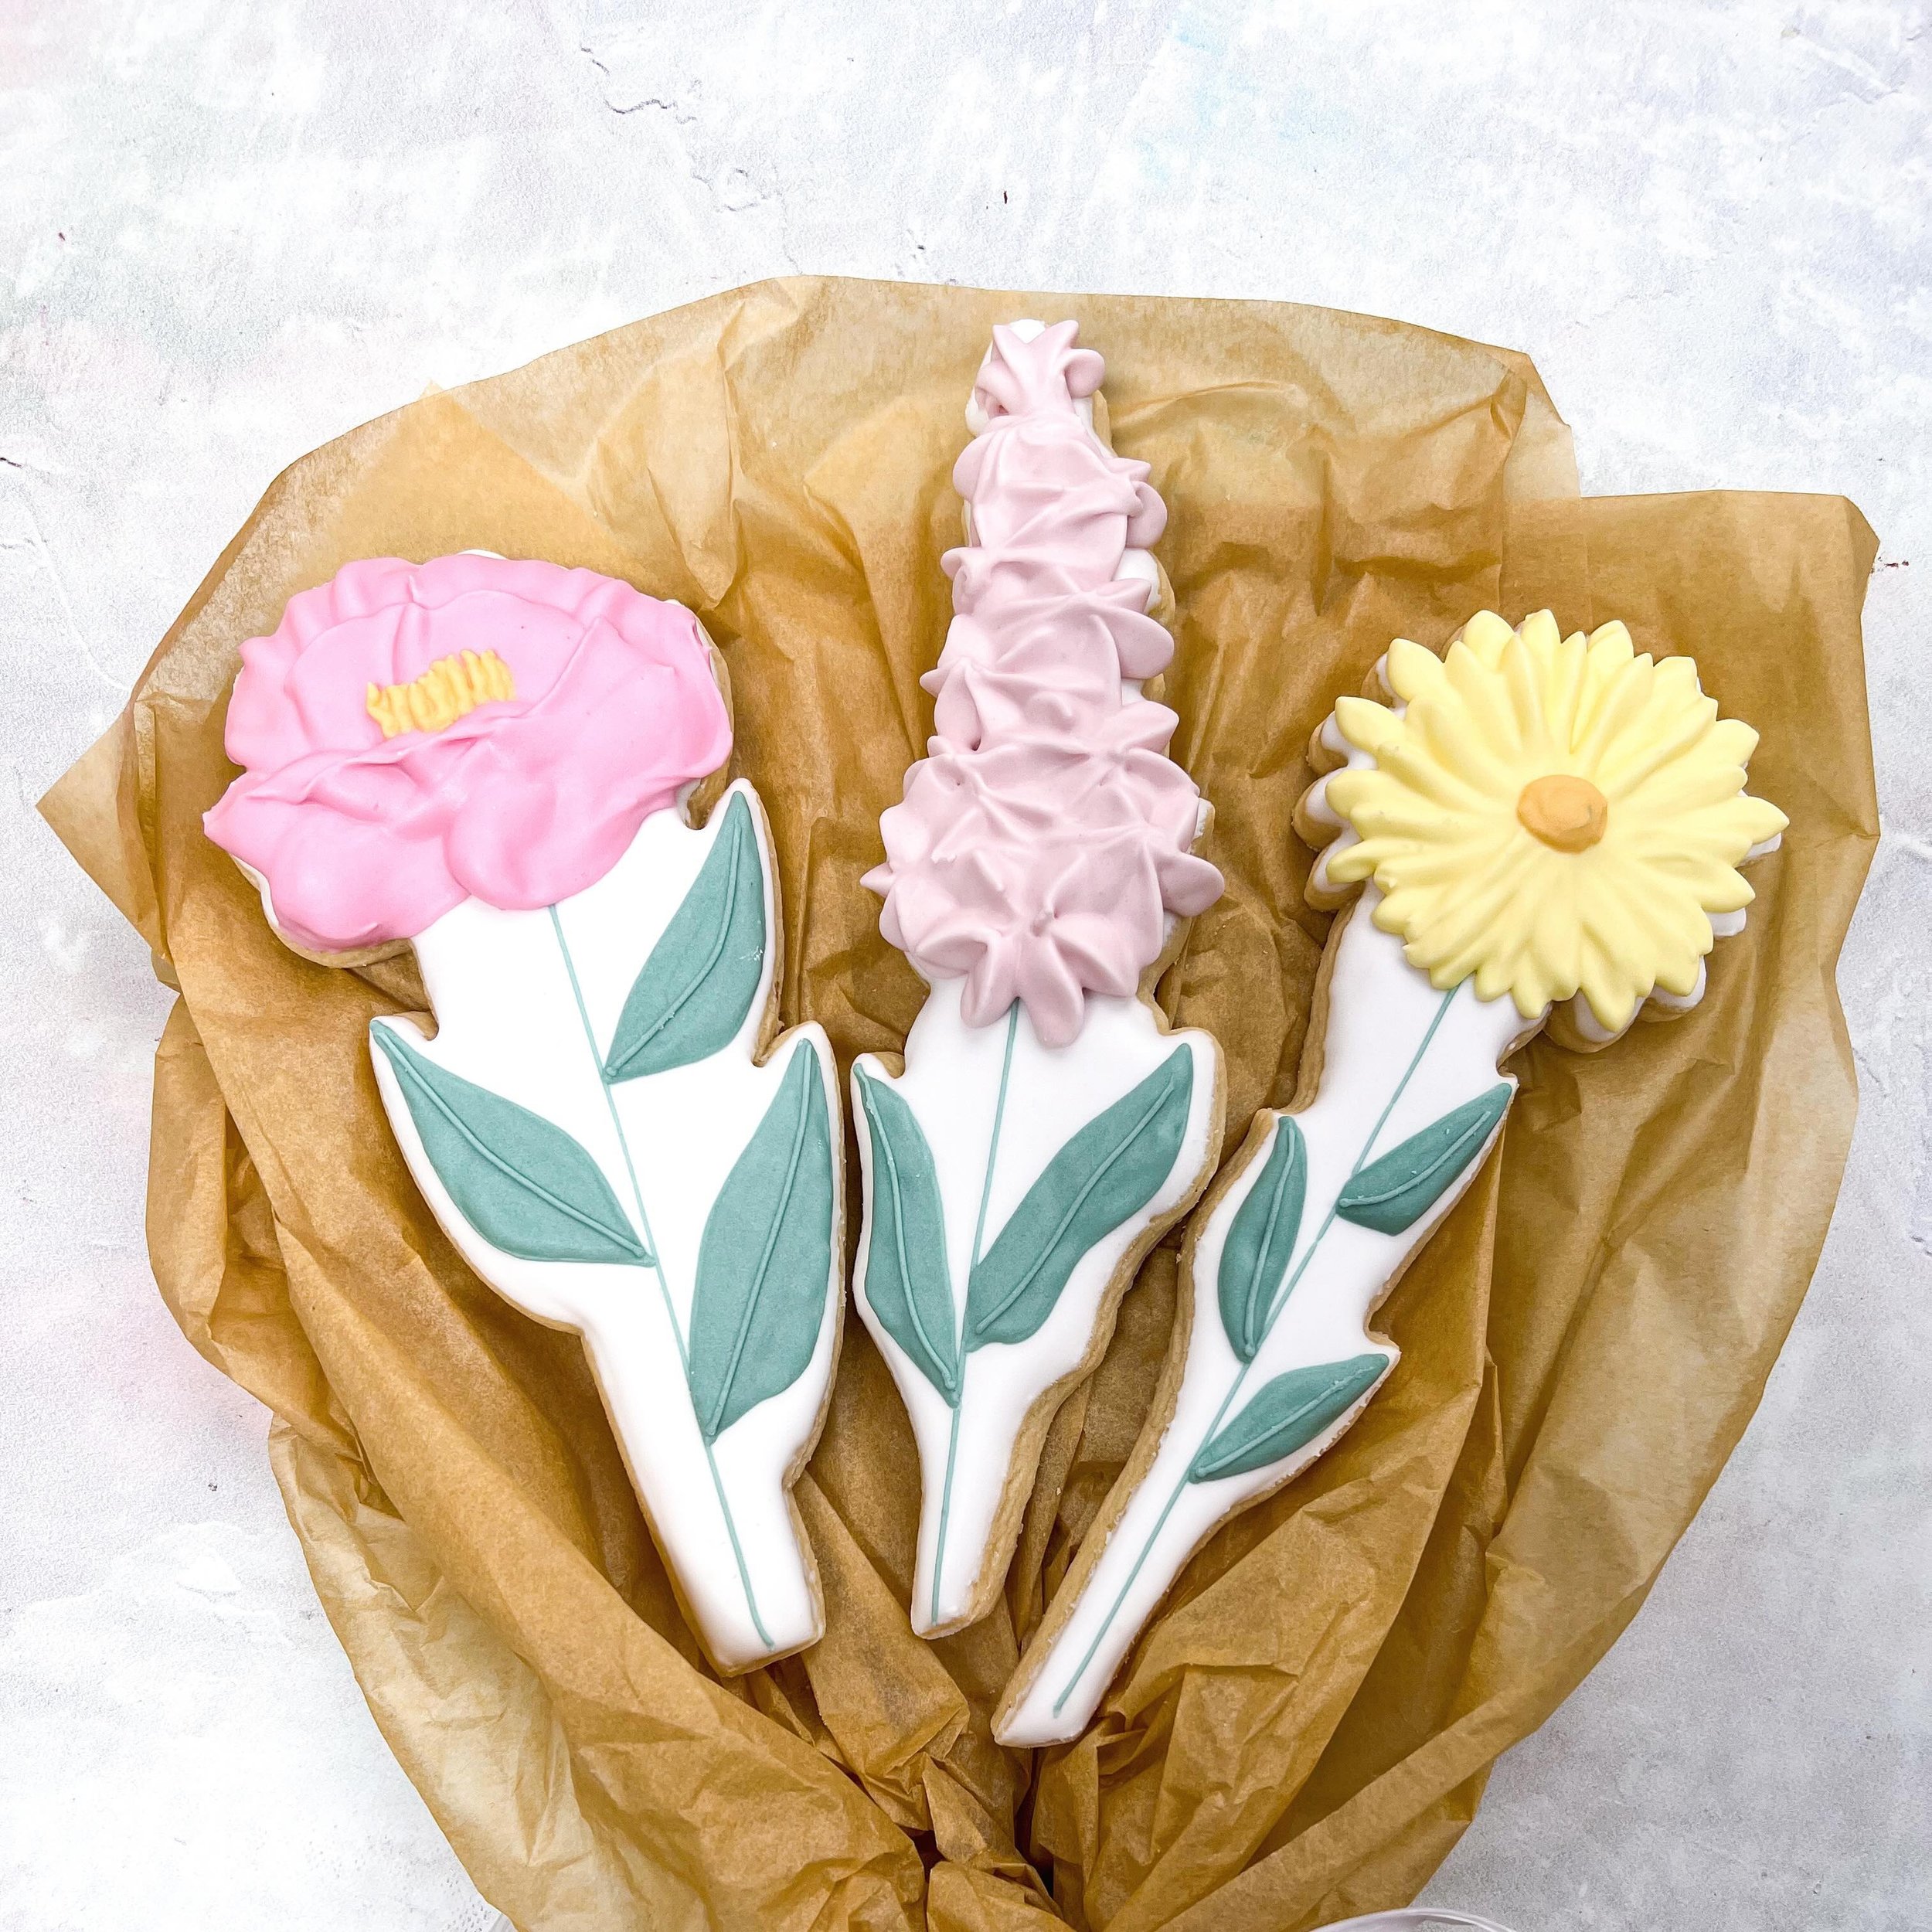 🌸 Only a few days left to order an edible cookie bouquet for Mother&rsquo;s Day!

A few other delightful treats are available - visit our website for more details.

#comfortbakeshop